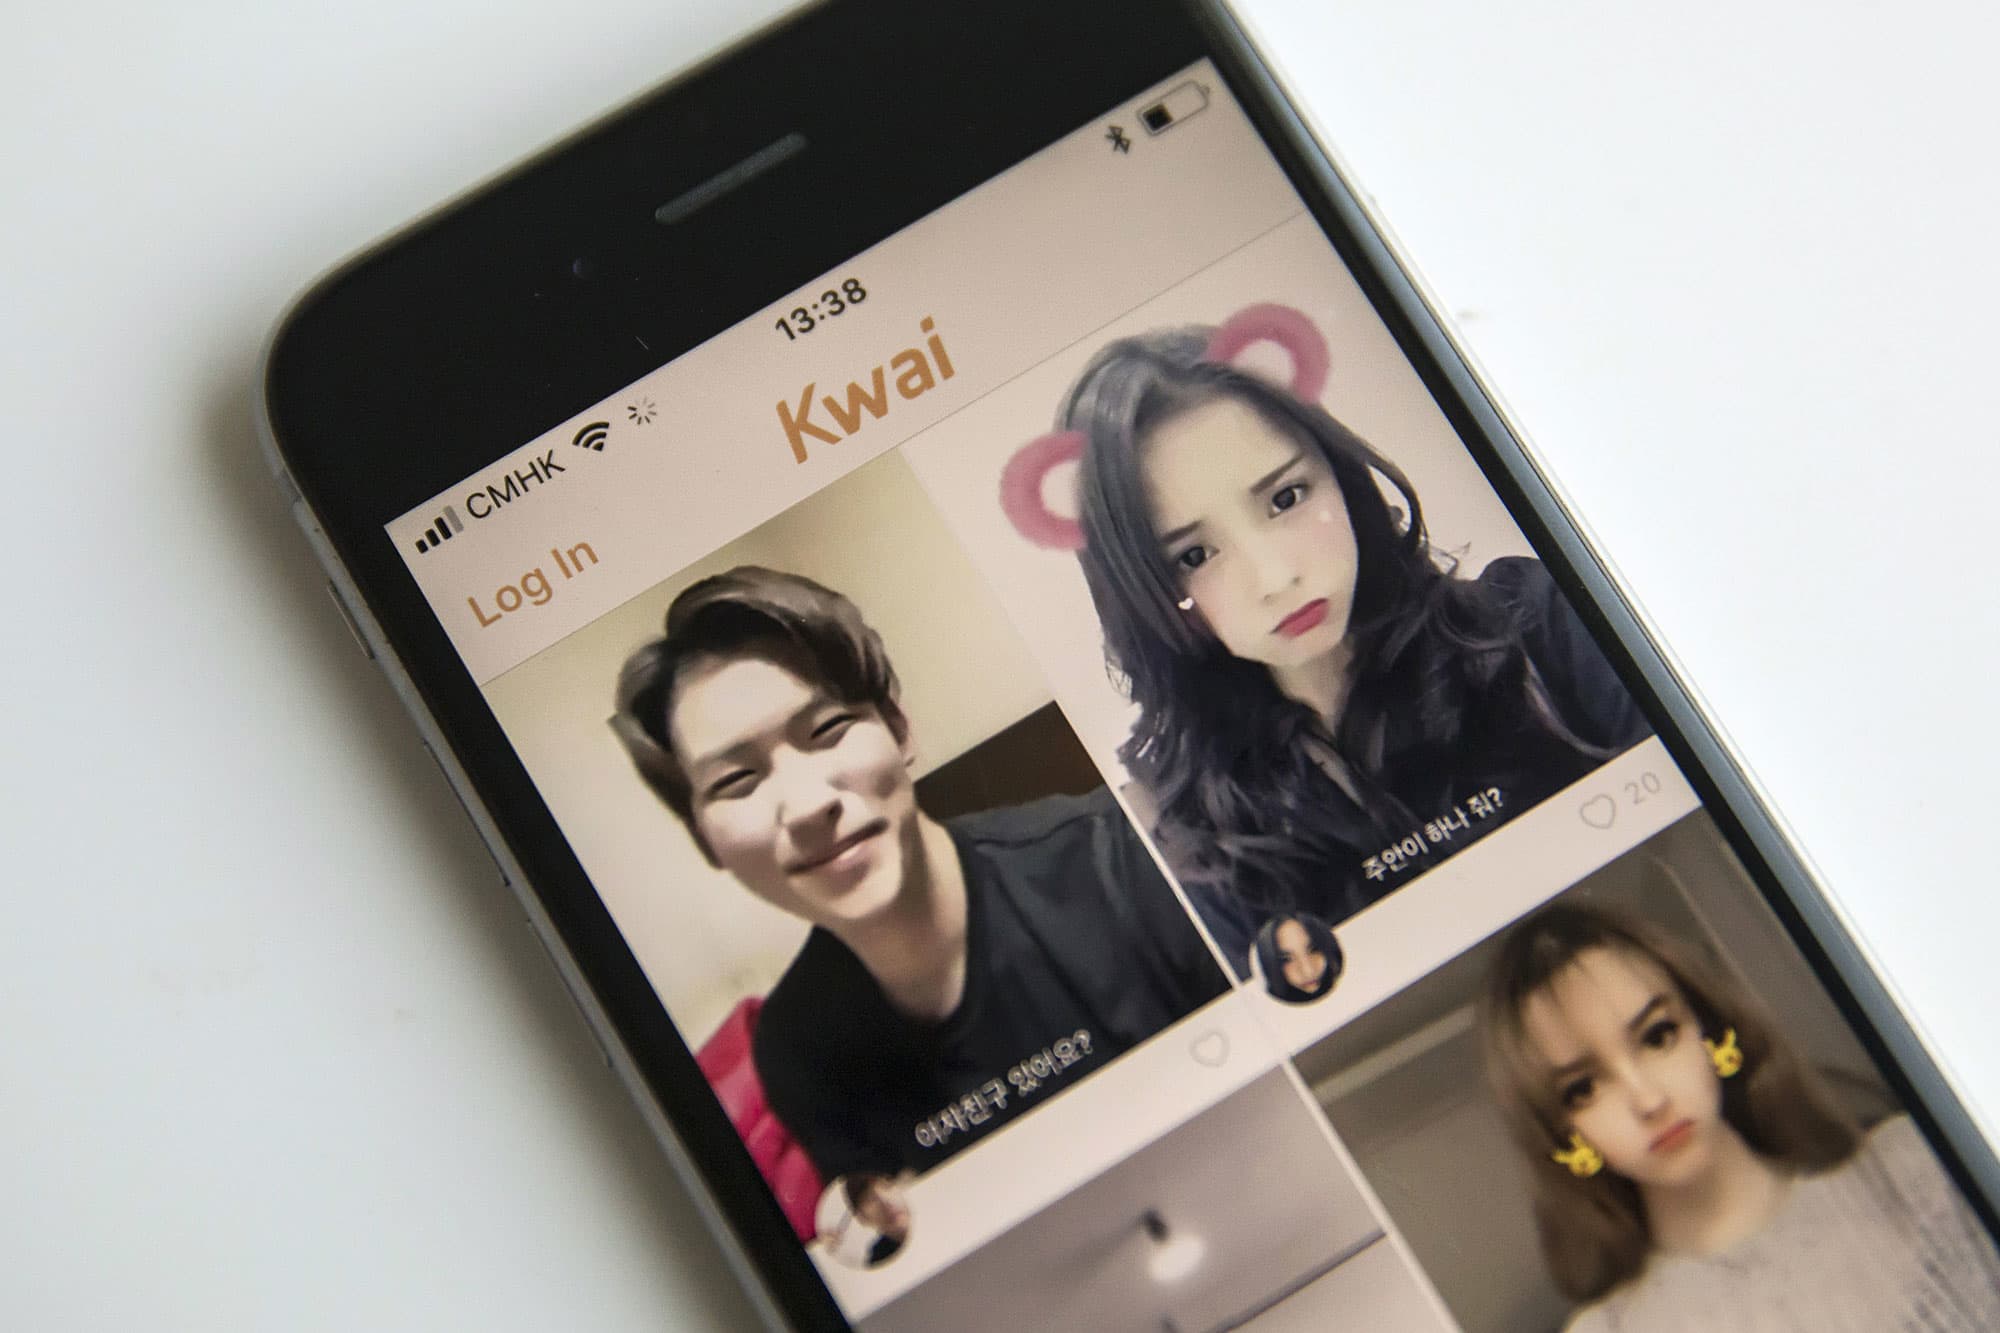 Kwai Becomes Second Highest Grossing Photo and Video App Globally